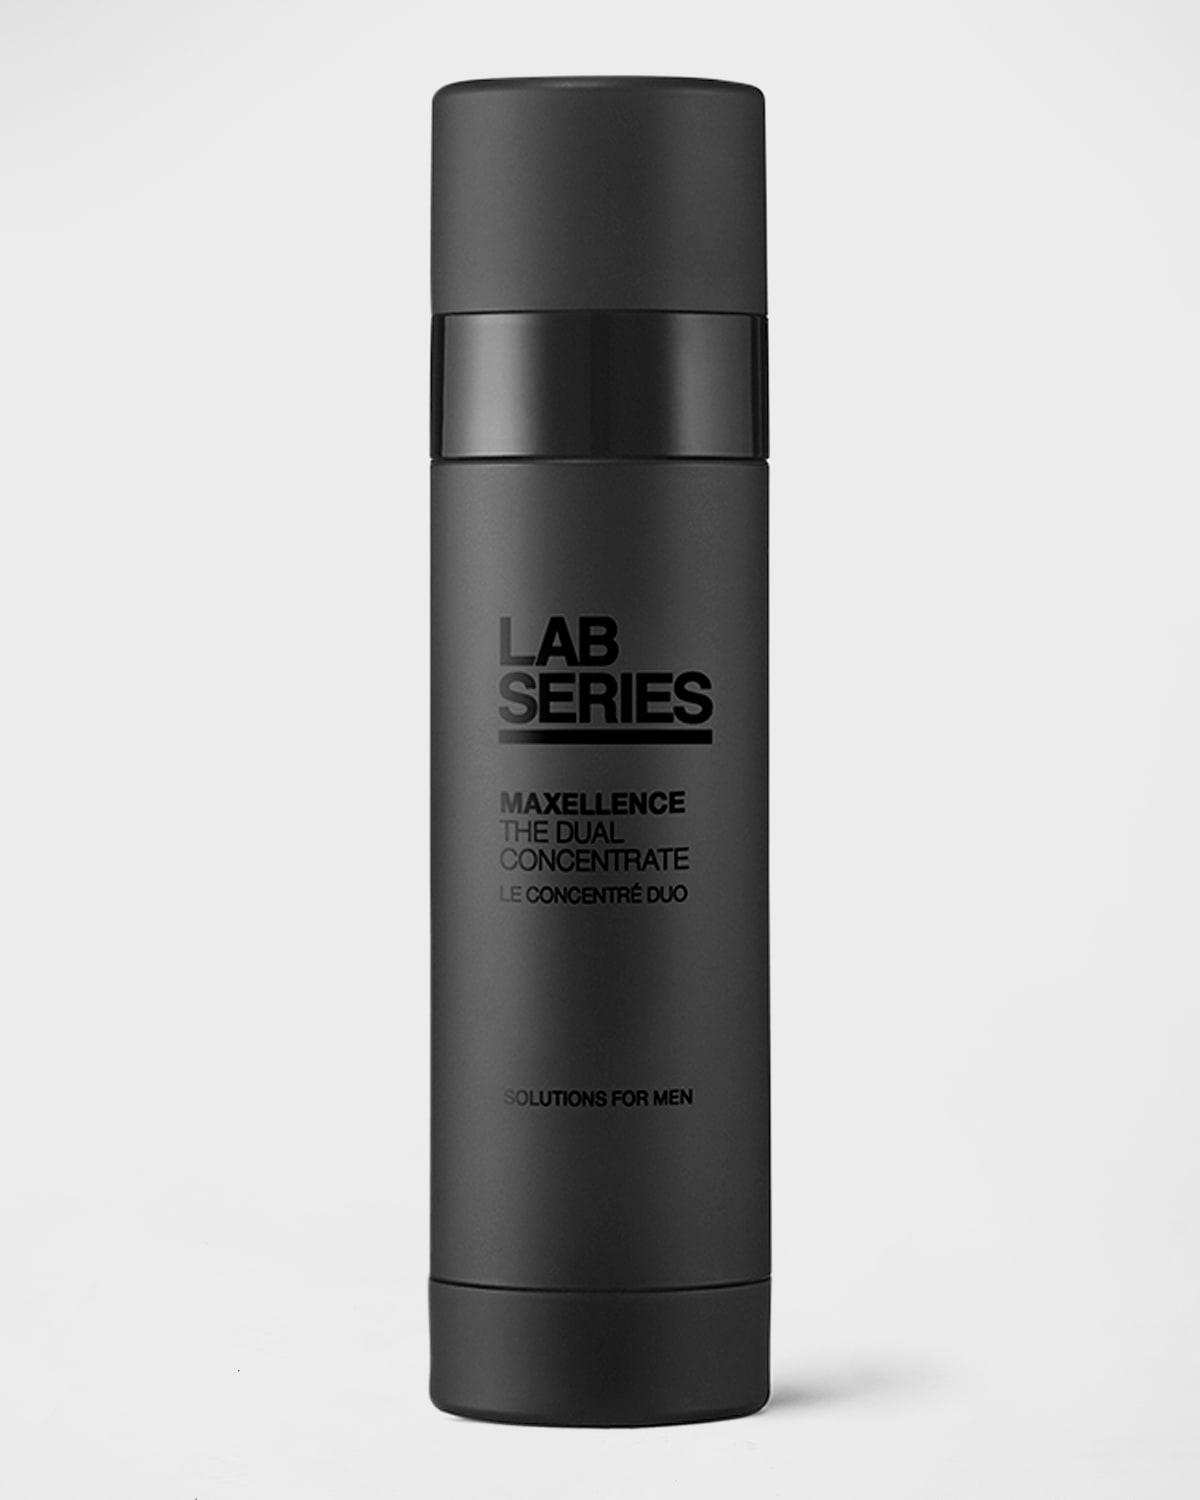 Lab Series for Men 1.7 oz. Maxellence The Dual Concentrate